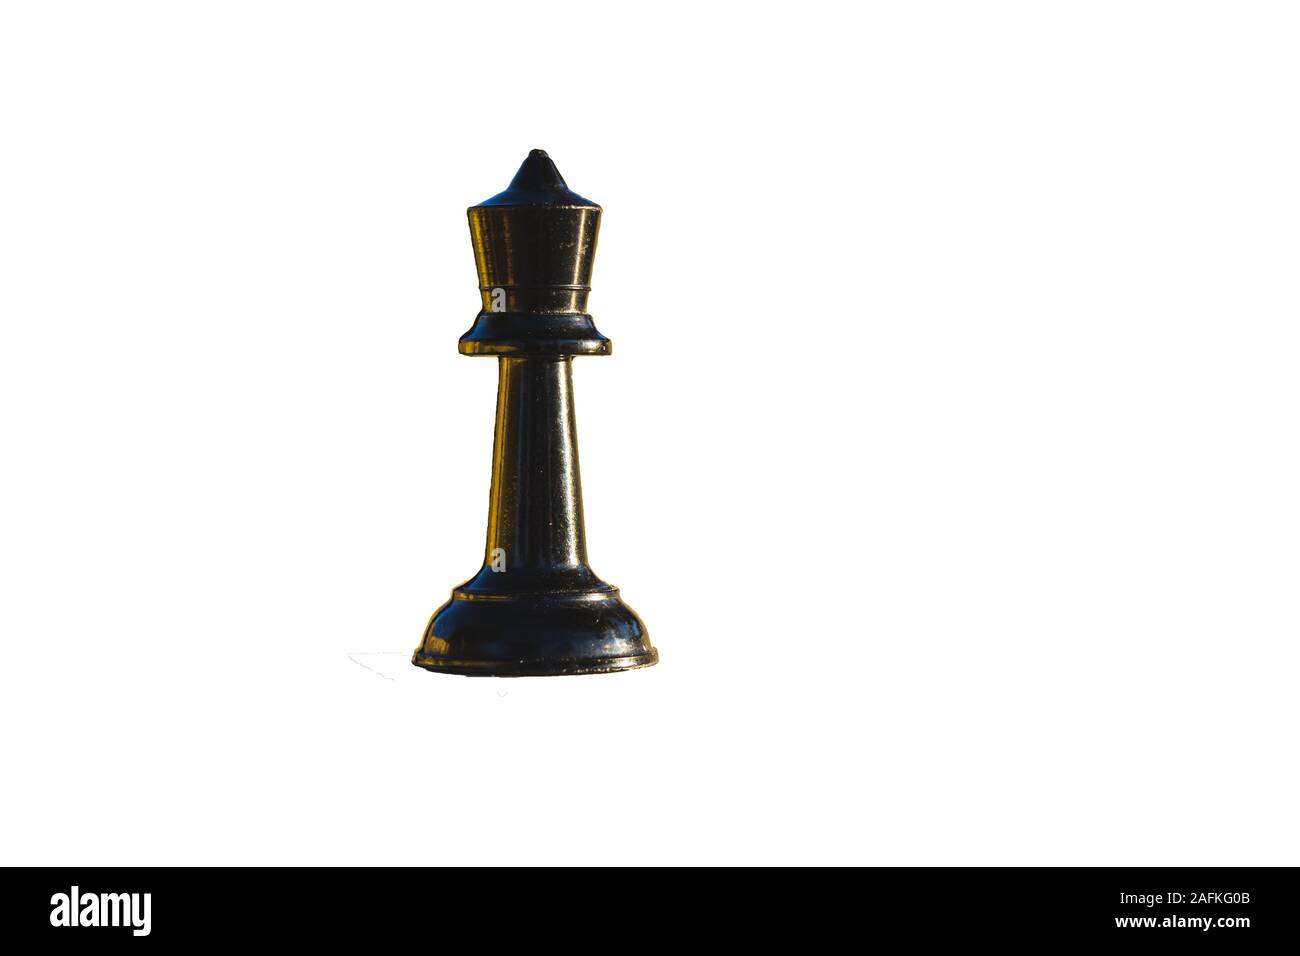 Black queen chess piece isolated on a white background. Stock Photo